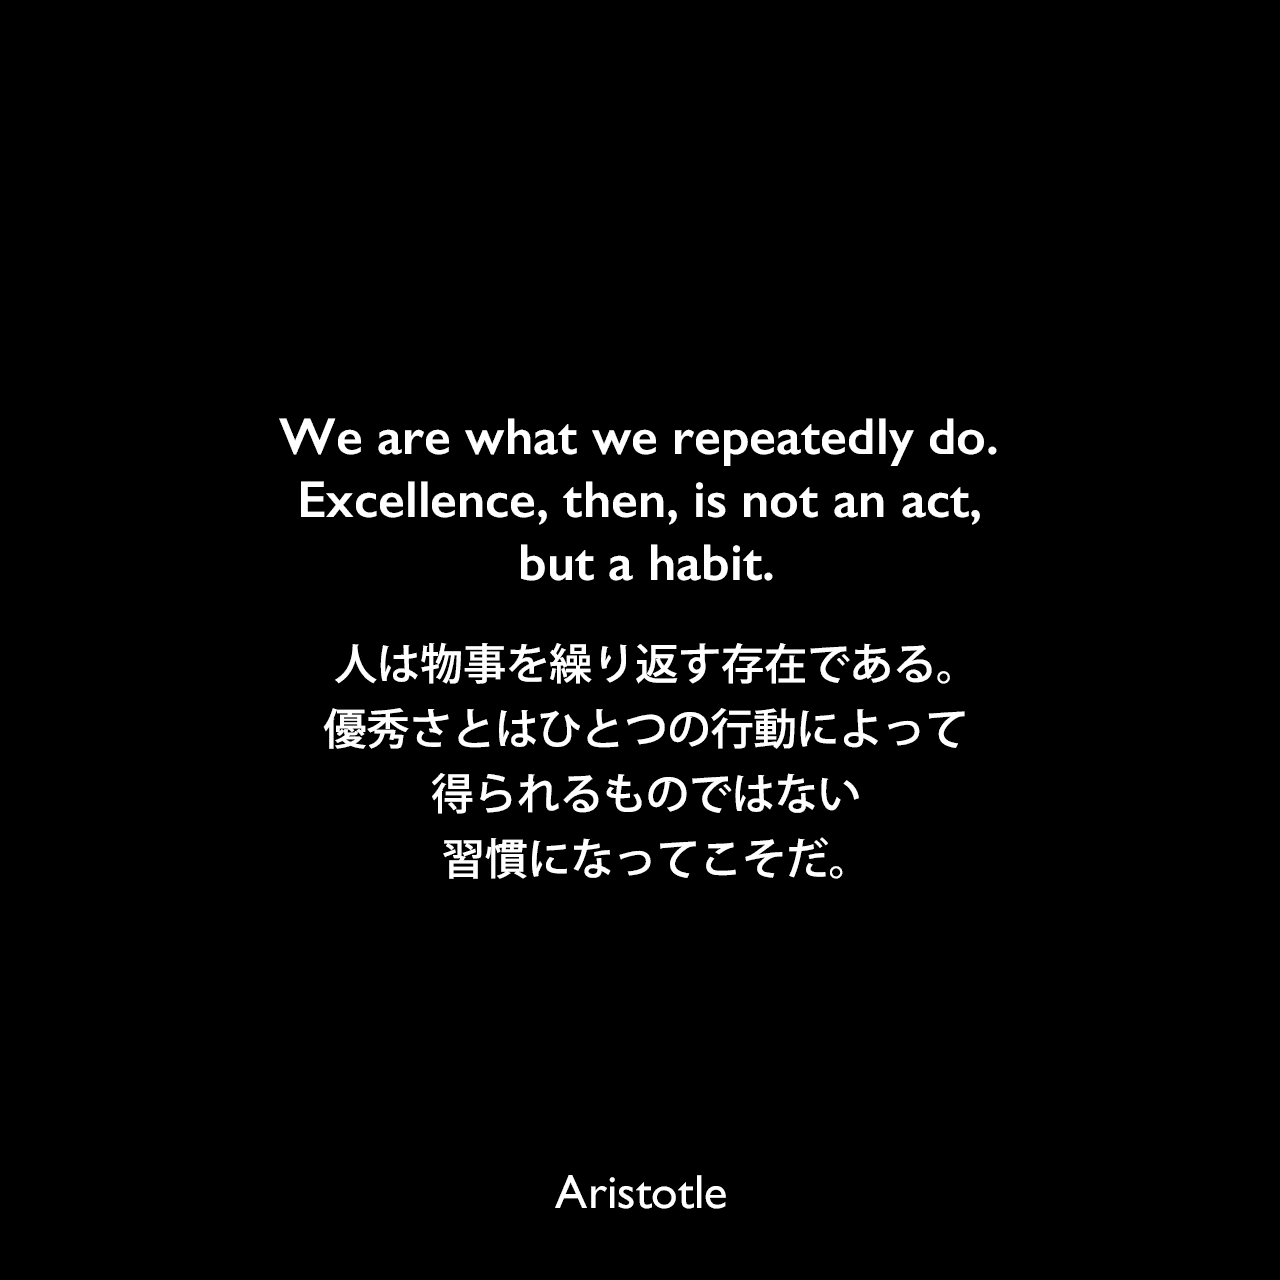 We are what we repeatedly do. Excellence, then, is not an act, but a habit.人は物事を繰り返す存在である。優秀さとはひとつの行動によって得られるものではない、習慣になってこそだ。Aristotle